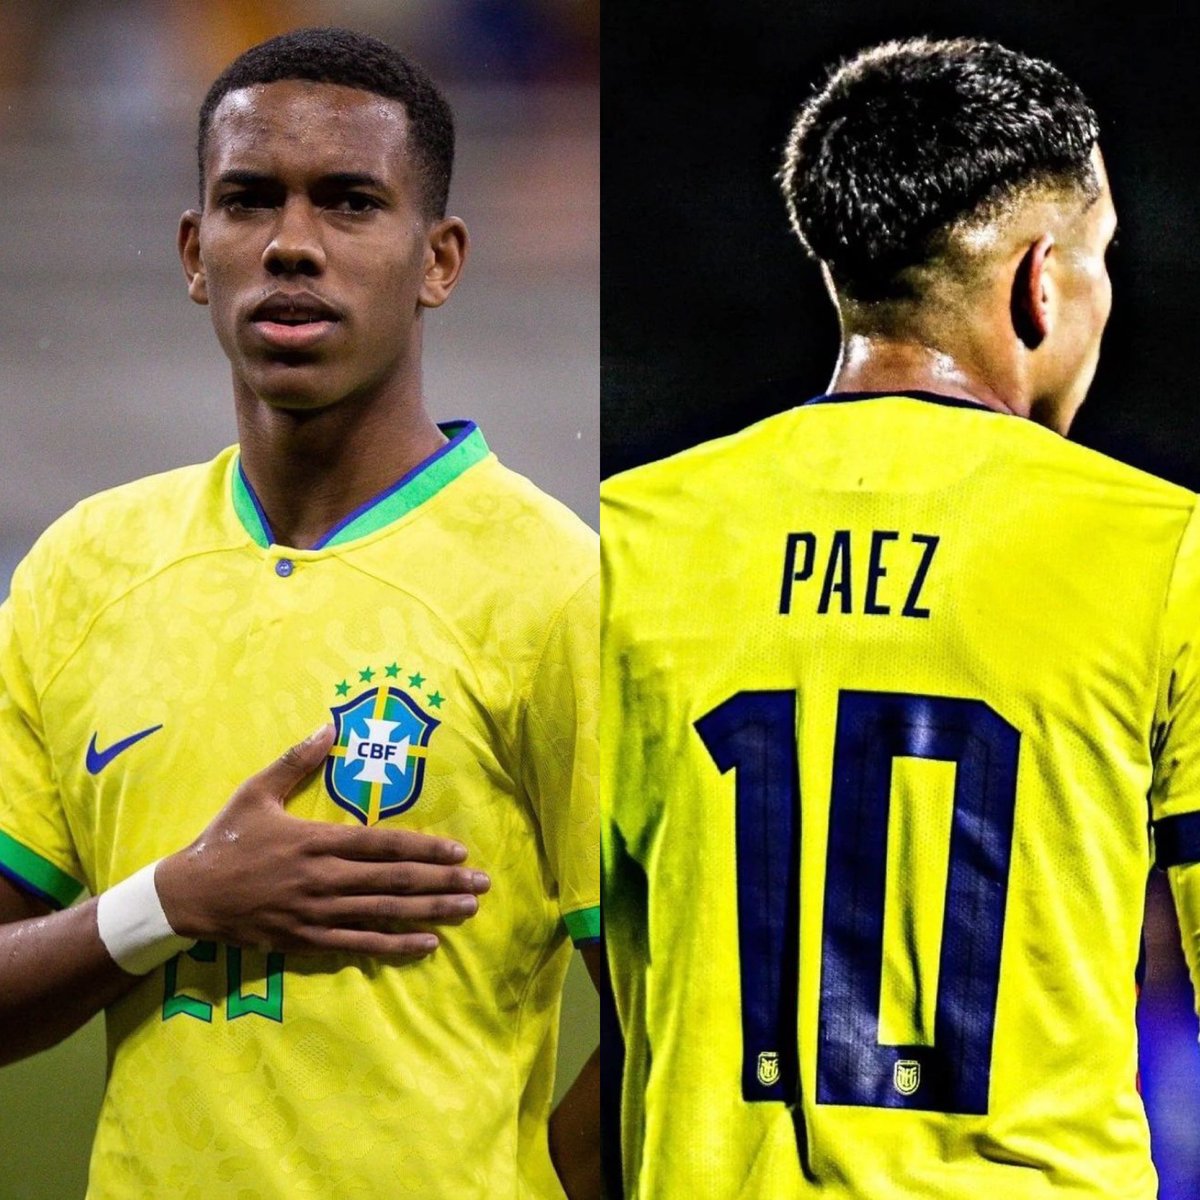 Chelsea will become a potent land for the germination of world class prospects. Estevao Willian & Kendry Paez will glow in the algorithm of positional play. They'll propel the natural cycling of technical nutrients at the club into pure deluxe & sprout in optimal synchrony. 🌱🧵